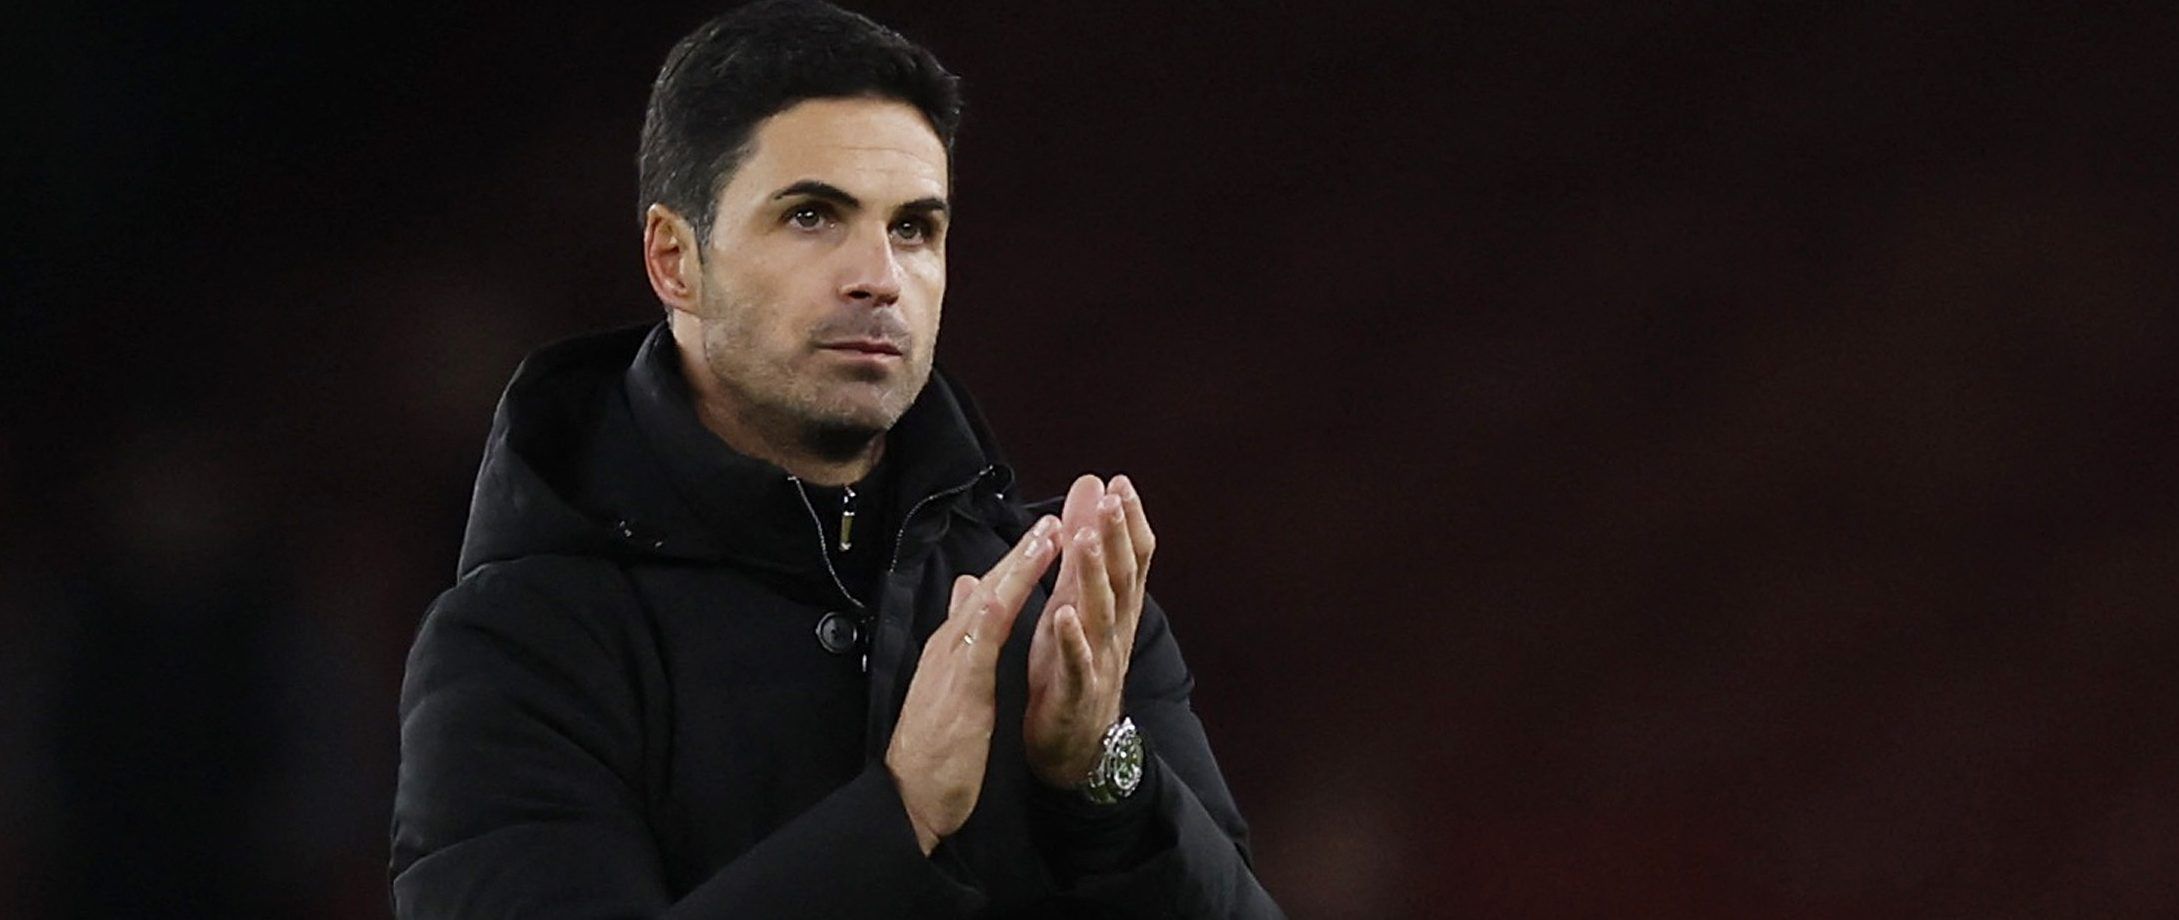 Soccer Football - Premier League - Arsenal v West Ham United - Emirates Stadium, London, Britain - December 26, 2022 Arsenal manager Mikel Arteta applauds fans after the match Action Images via Reuters/Andrew Couldridge EDITORIAL USE ONLY. No use with unauthorized audio, video, data, fixture lists, club/league logos or 'live' services. Online in-match use limited to 75 images, no video emulation. No use in betting, games or single club /league/player publications.  Please contact your account re